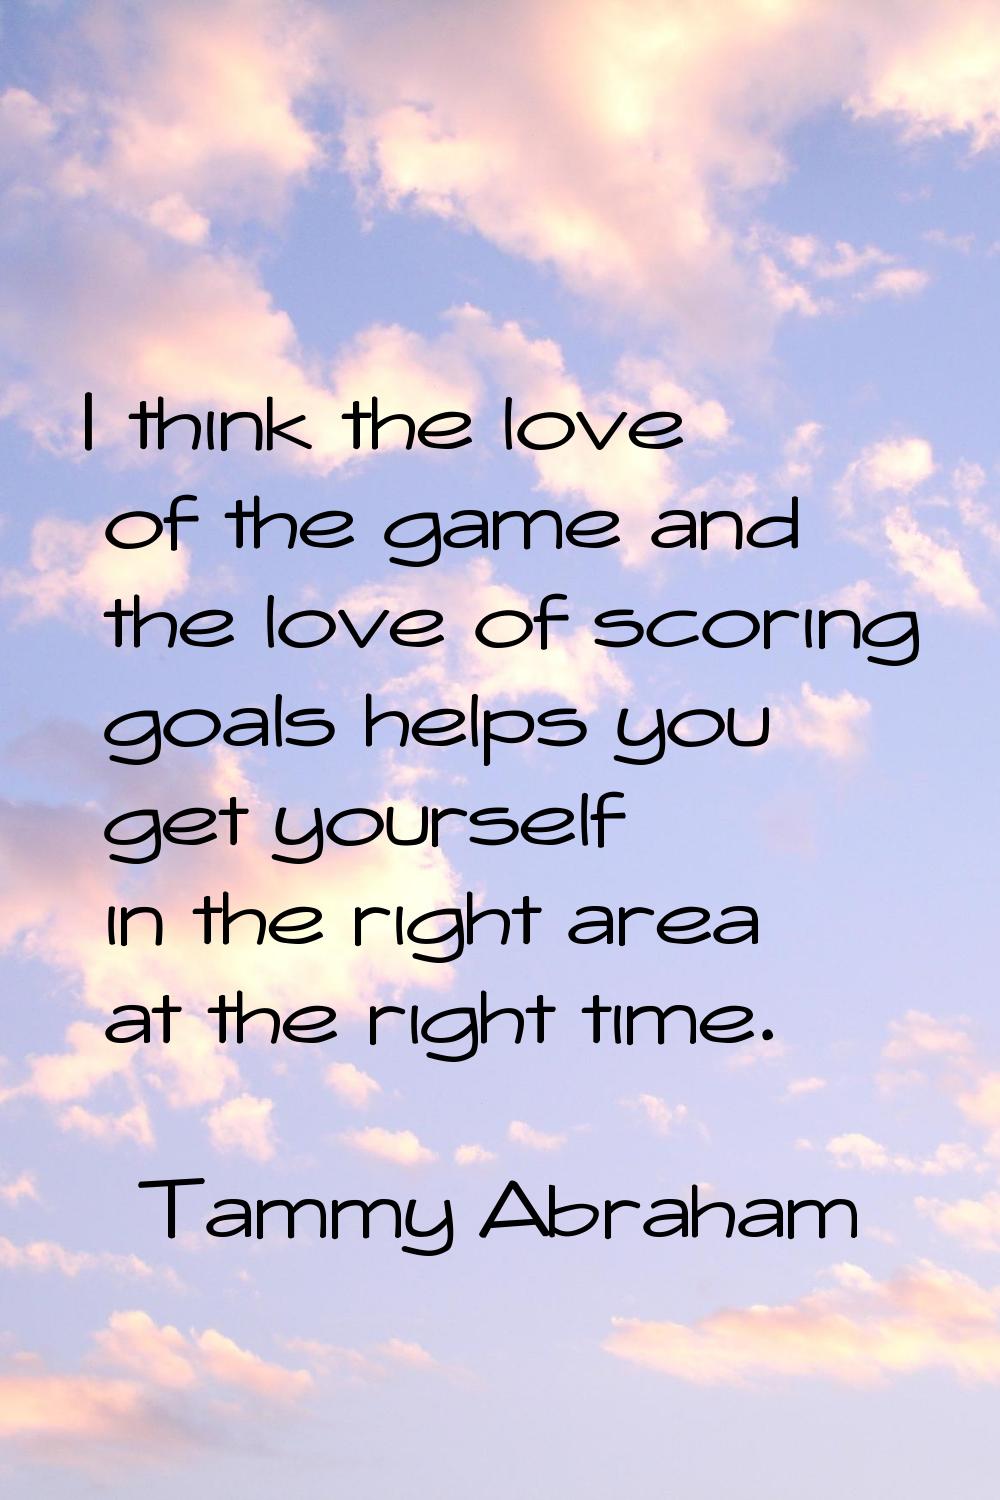 I think the love of the game and the love of scoring goals helps you get yourself in the right area